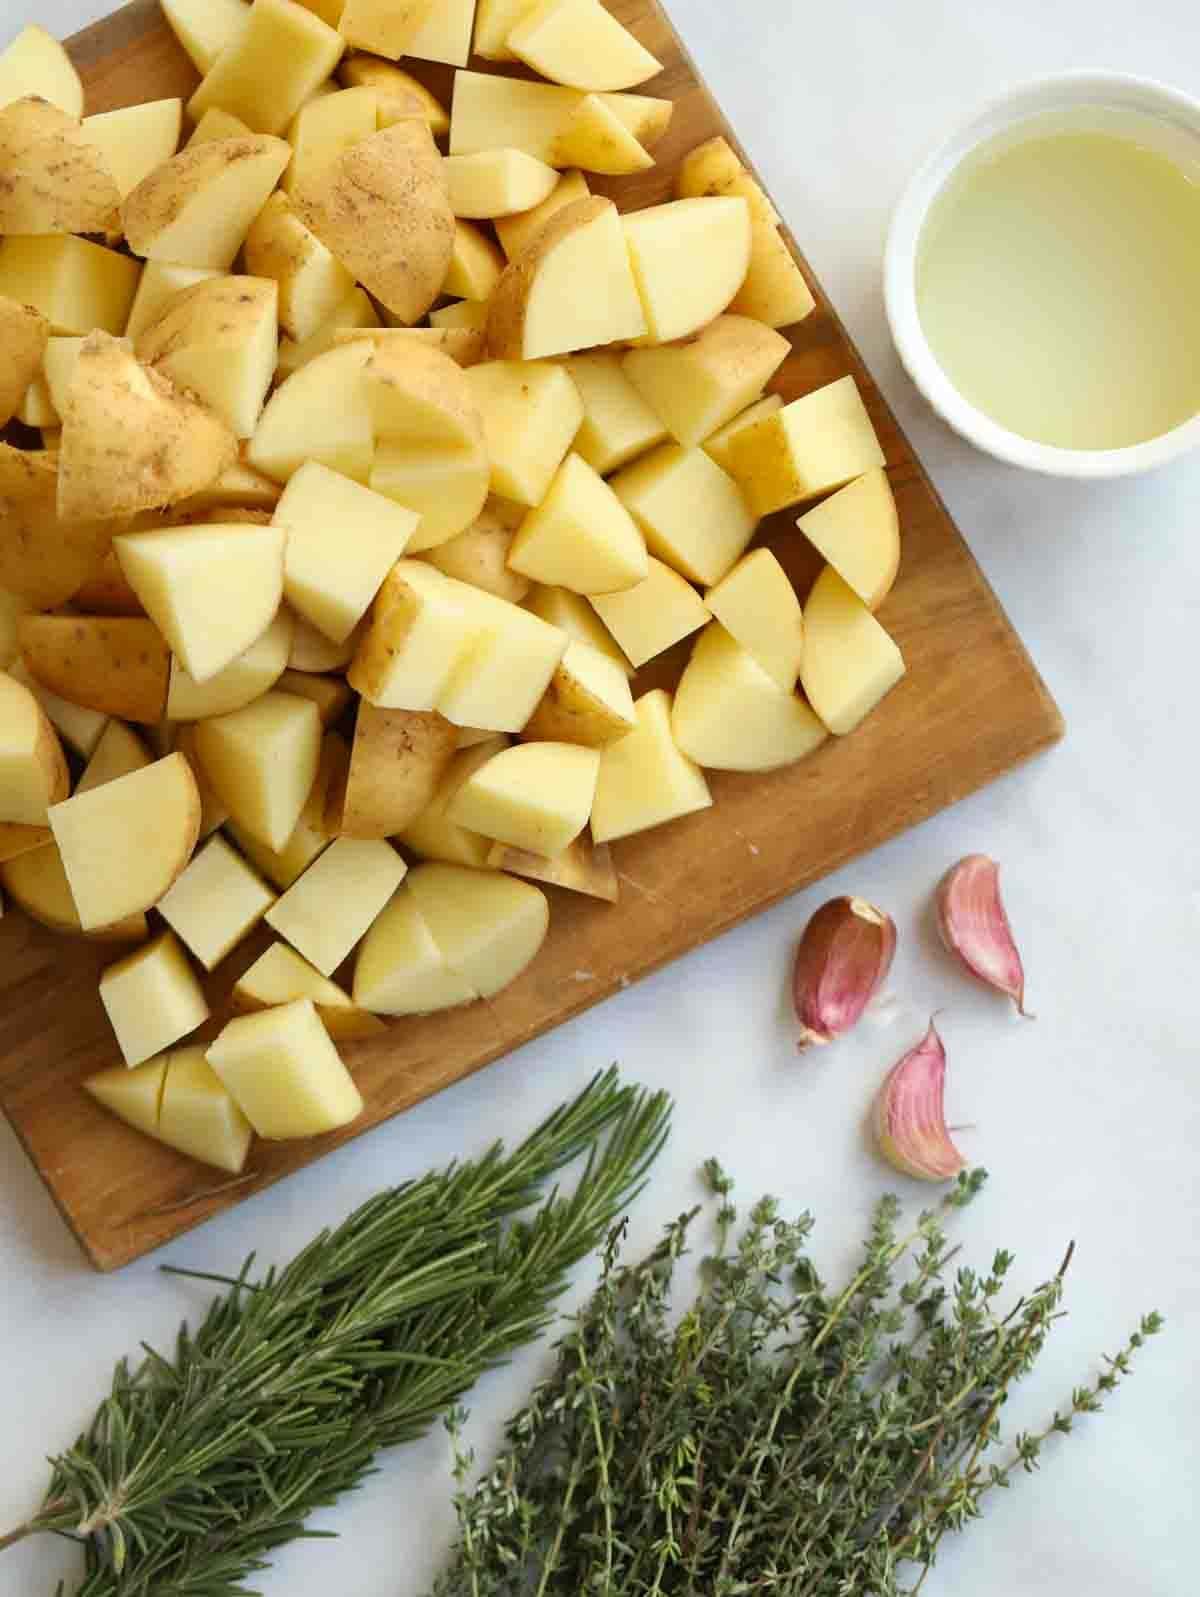 The raw ingredients for making parmentier potatoes laid out on a counter, including cubes of white potatoes, oil, garlic cloves and fresh herbs.